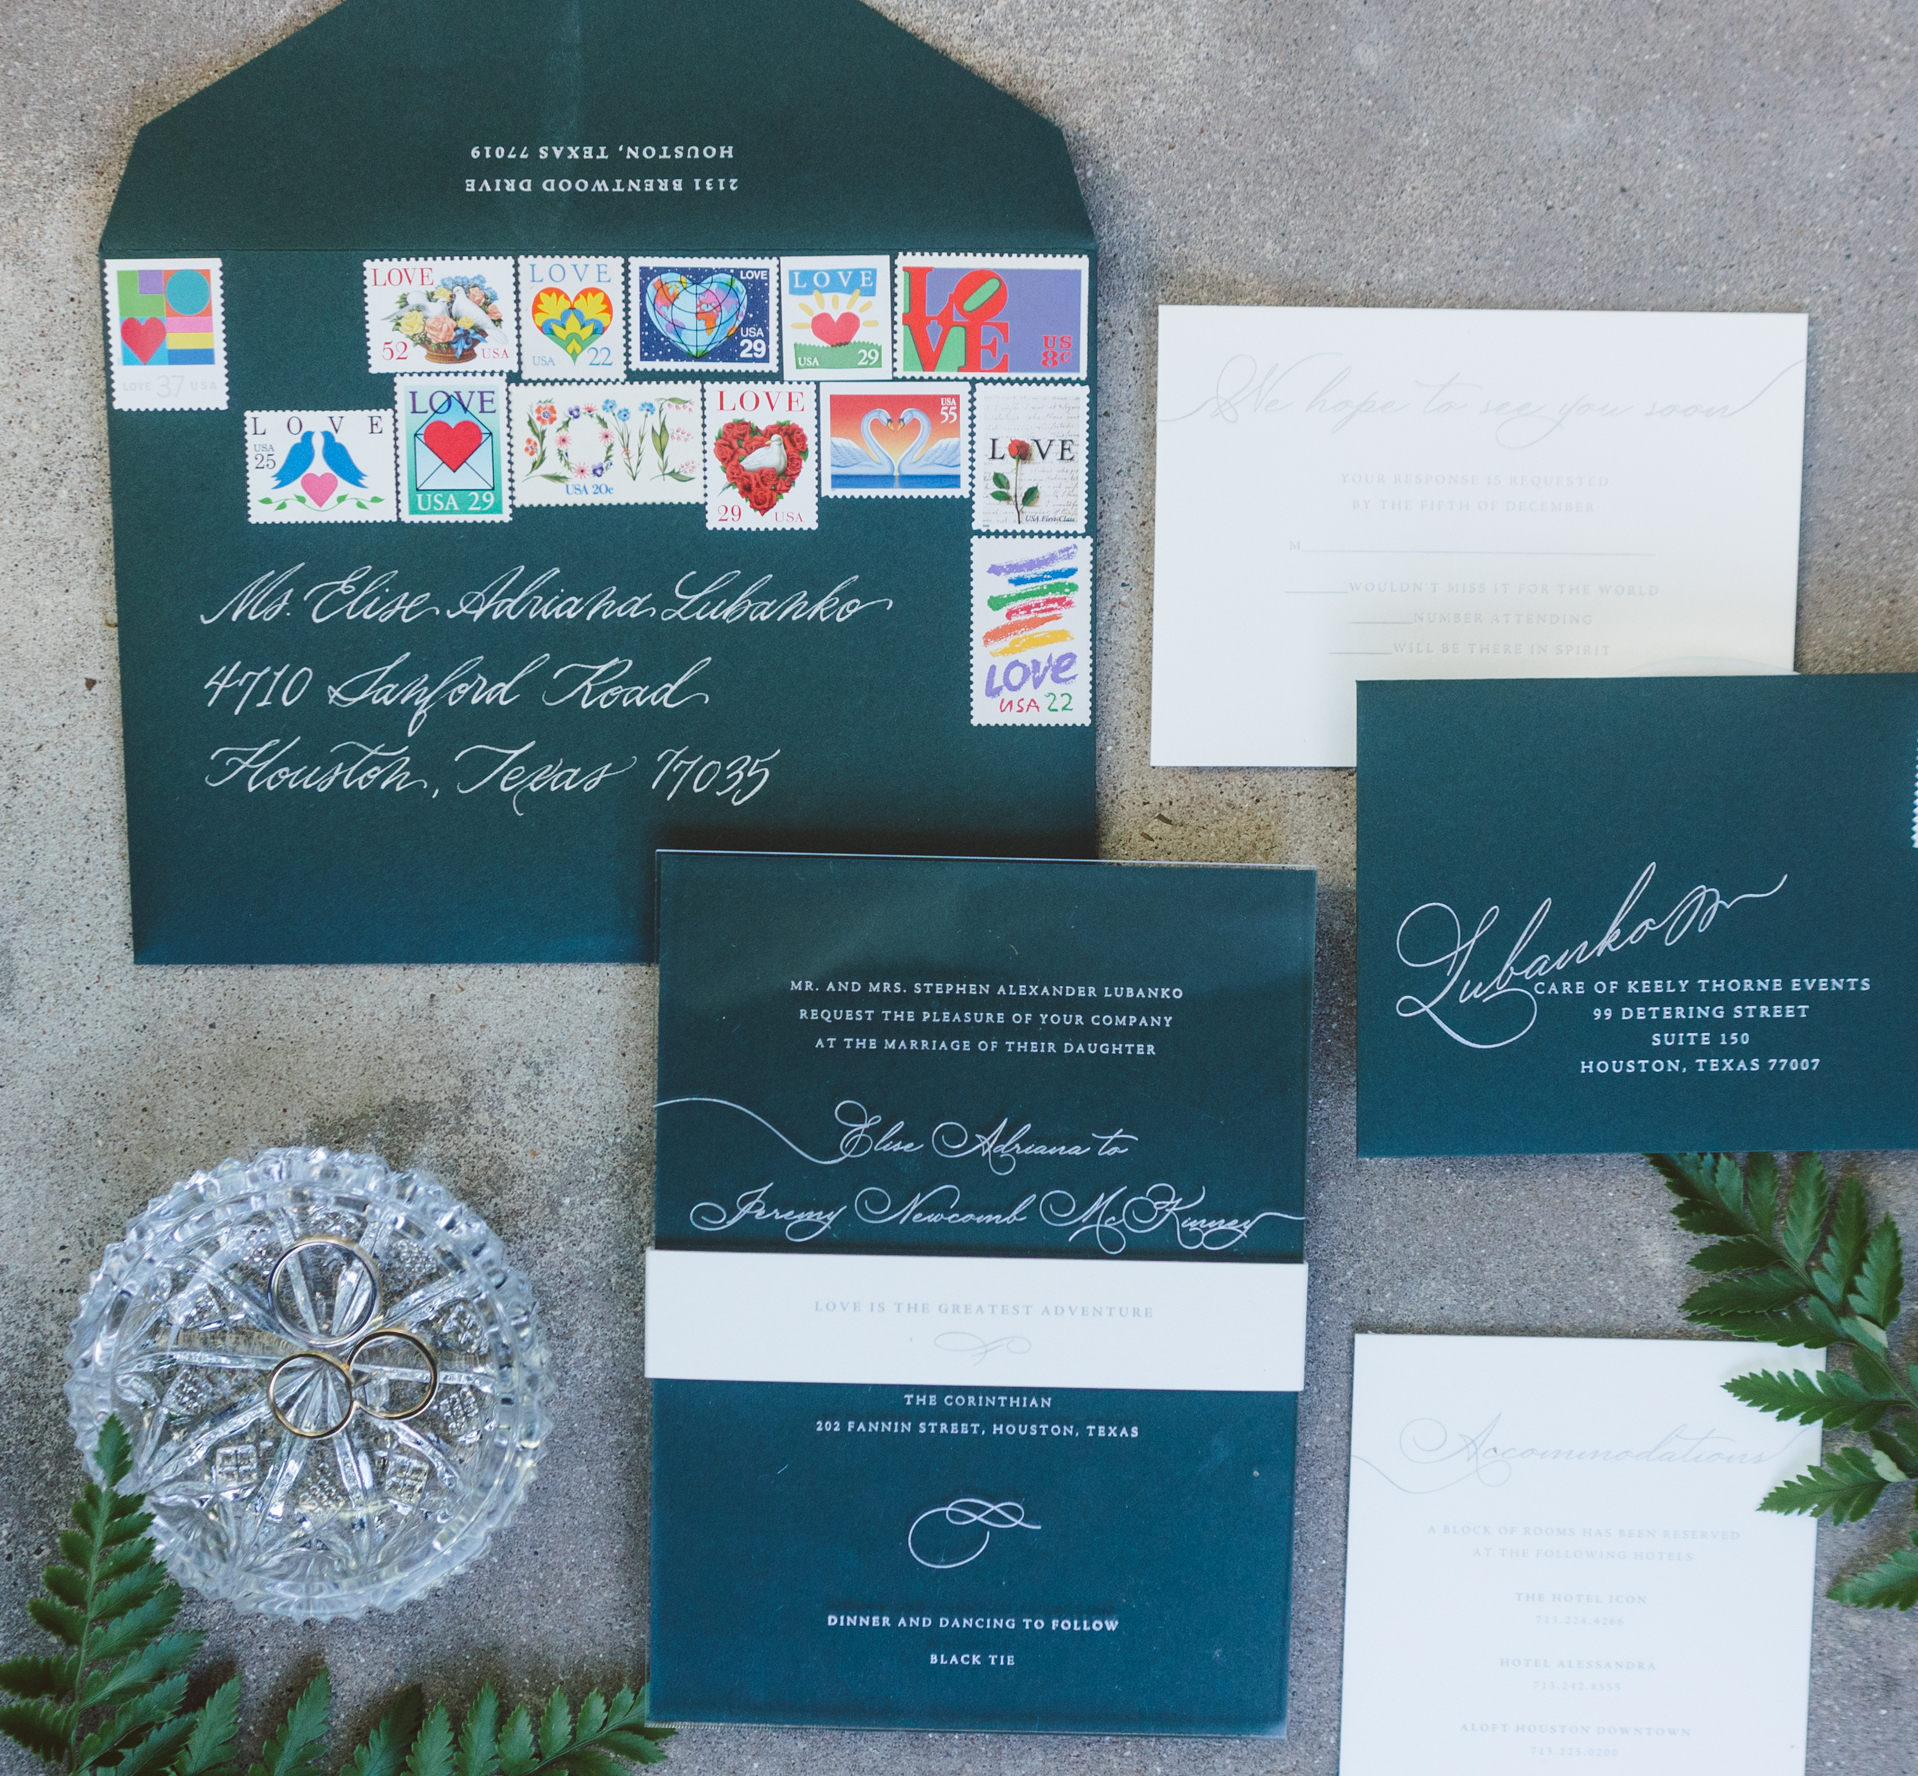 A flatlay of dark teal wedding invitations with cursive white writing and green leaves bordering them.